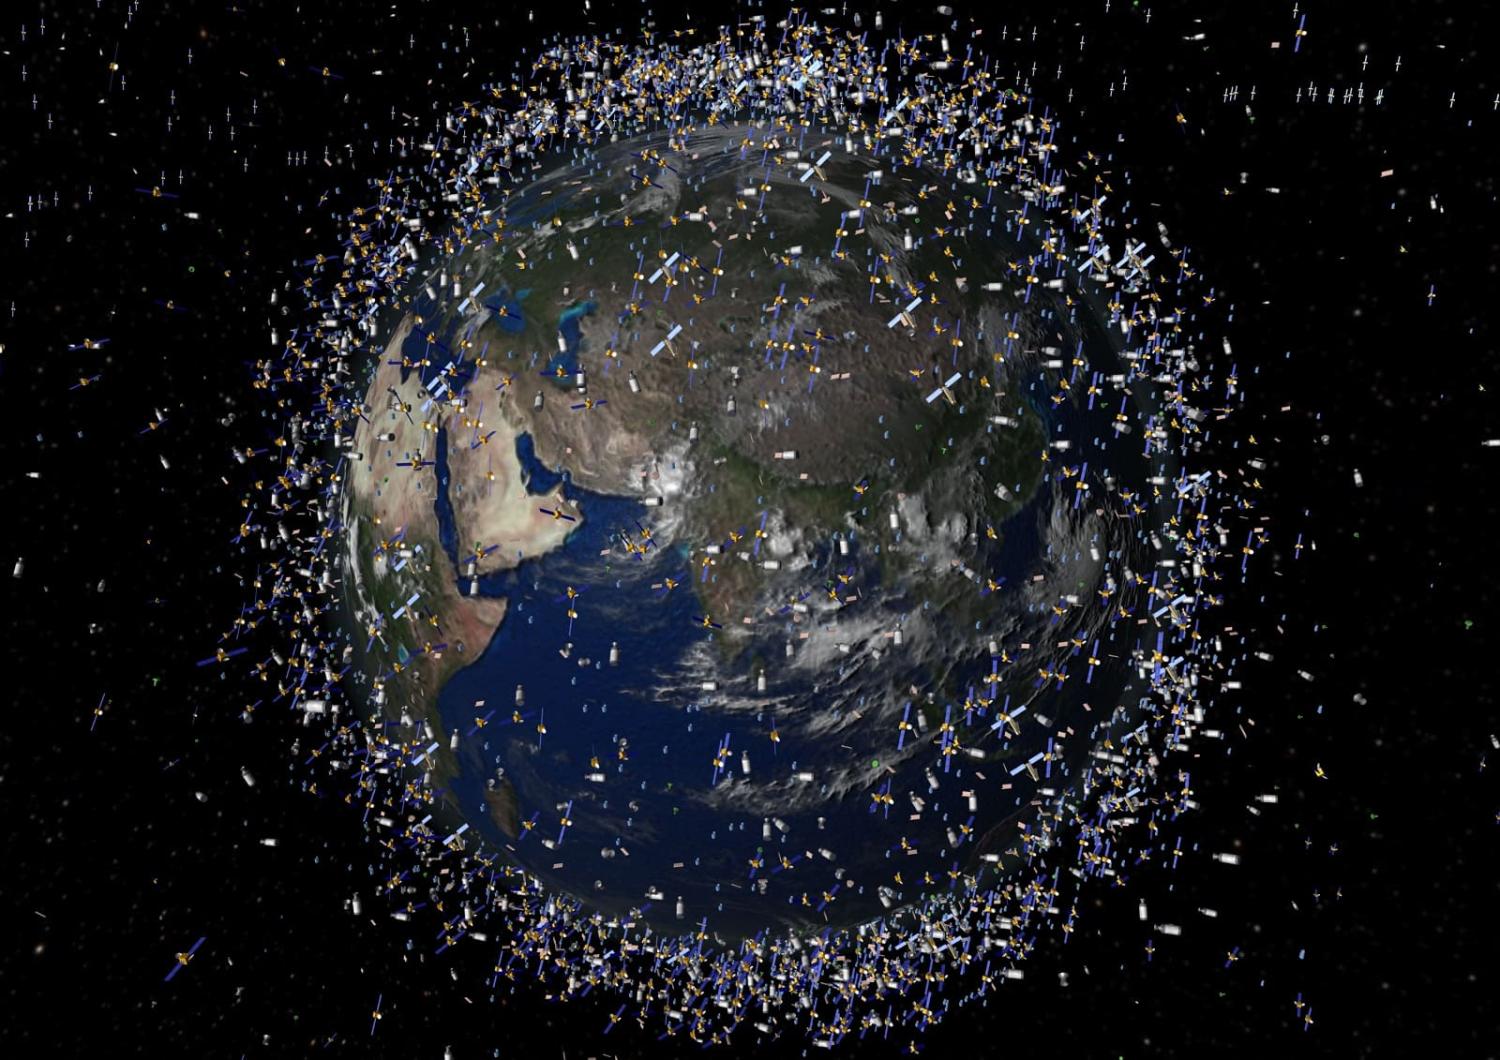 This computer-generated image shows some of the 11,500 trackable objects in low Earth Orbit where there are many commercial, military, scientific and navigational satellites (ESA/AFP via Getty Images)